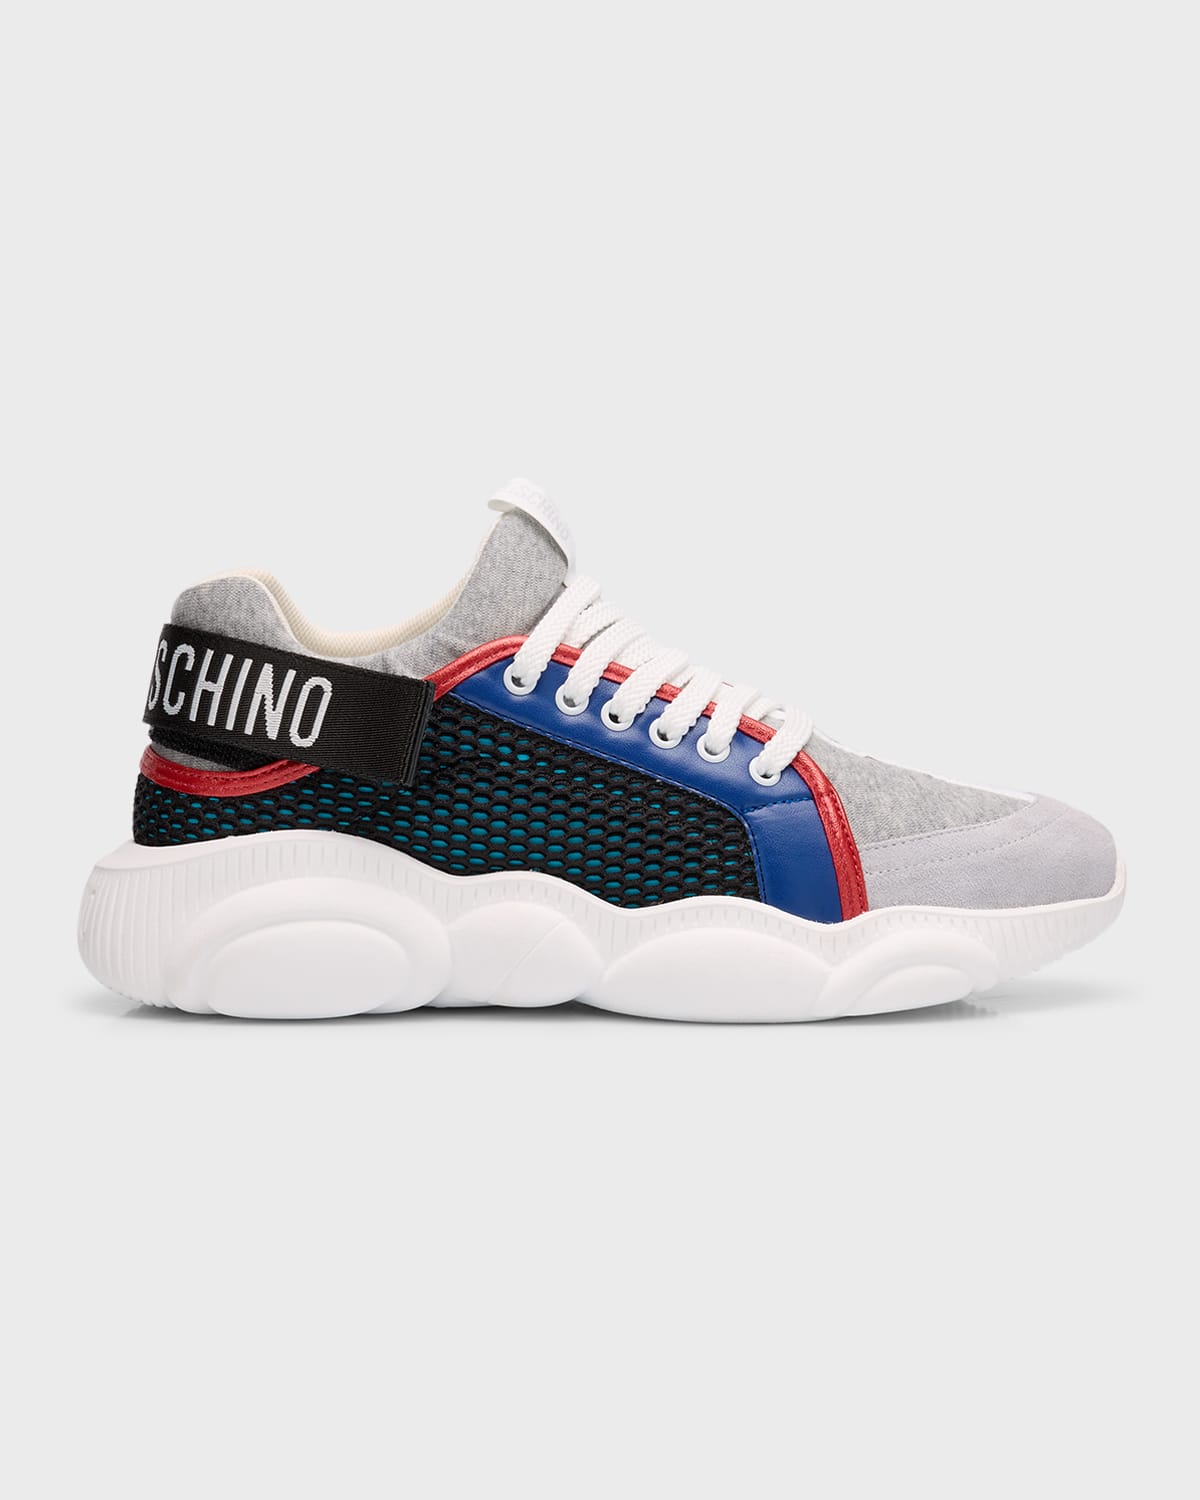 Moschino Men's Teddy Fashion Sneakers With Strap In Blue Multi